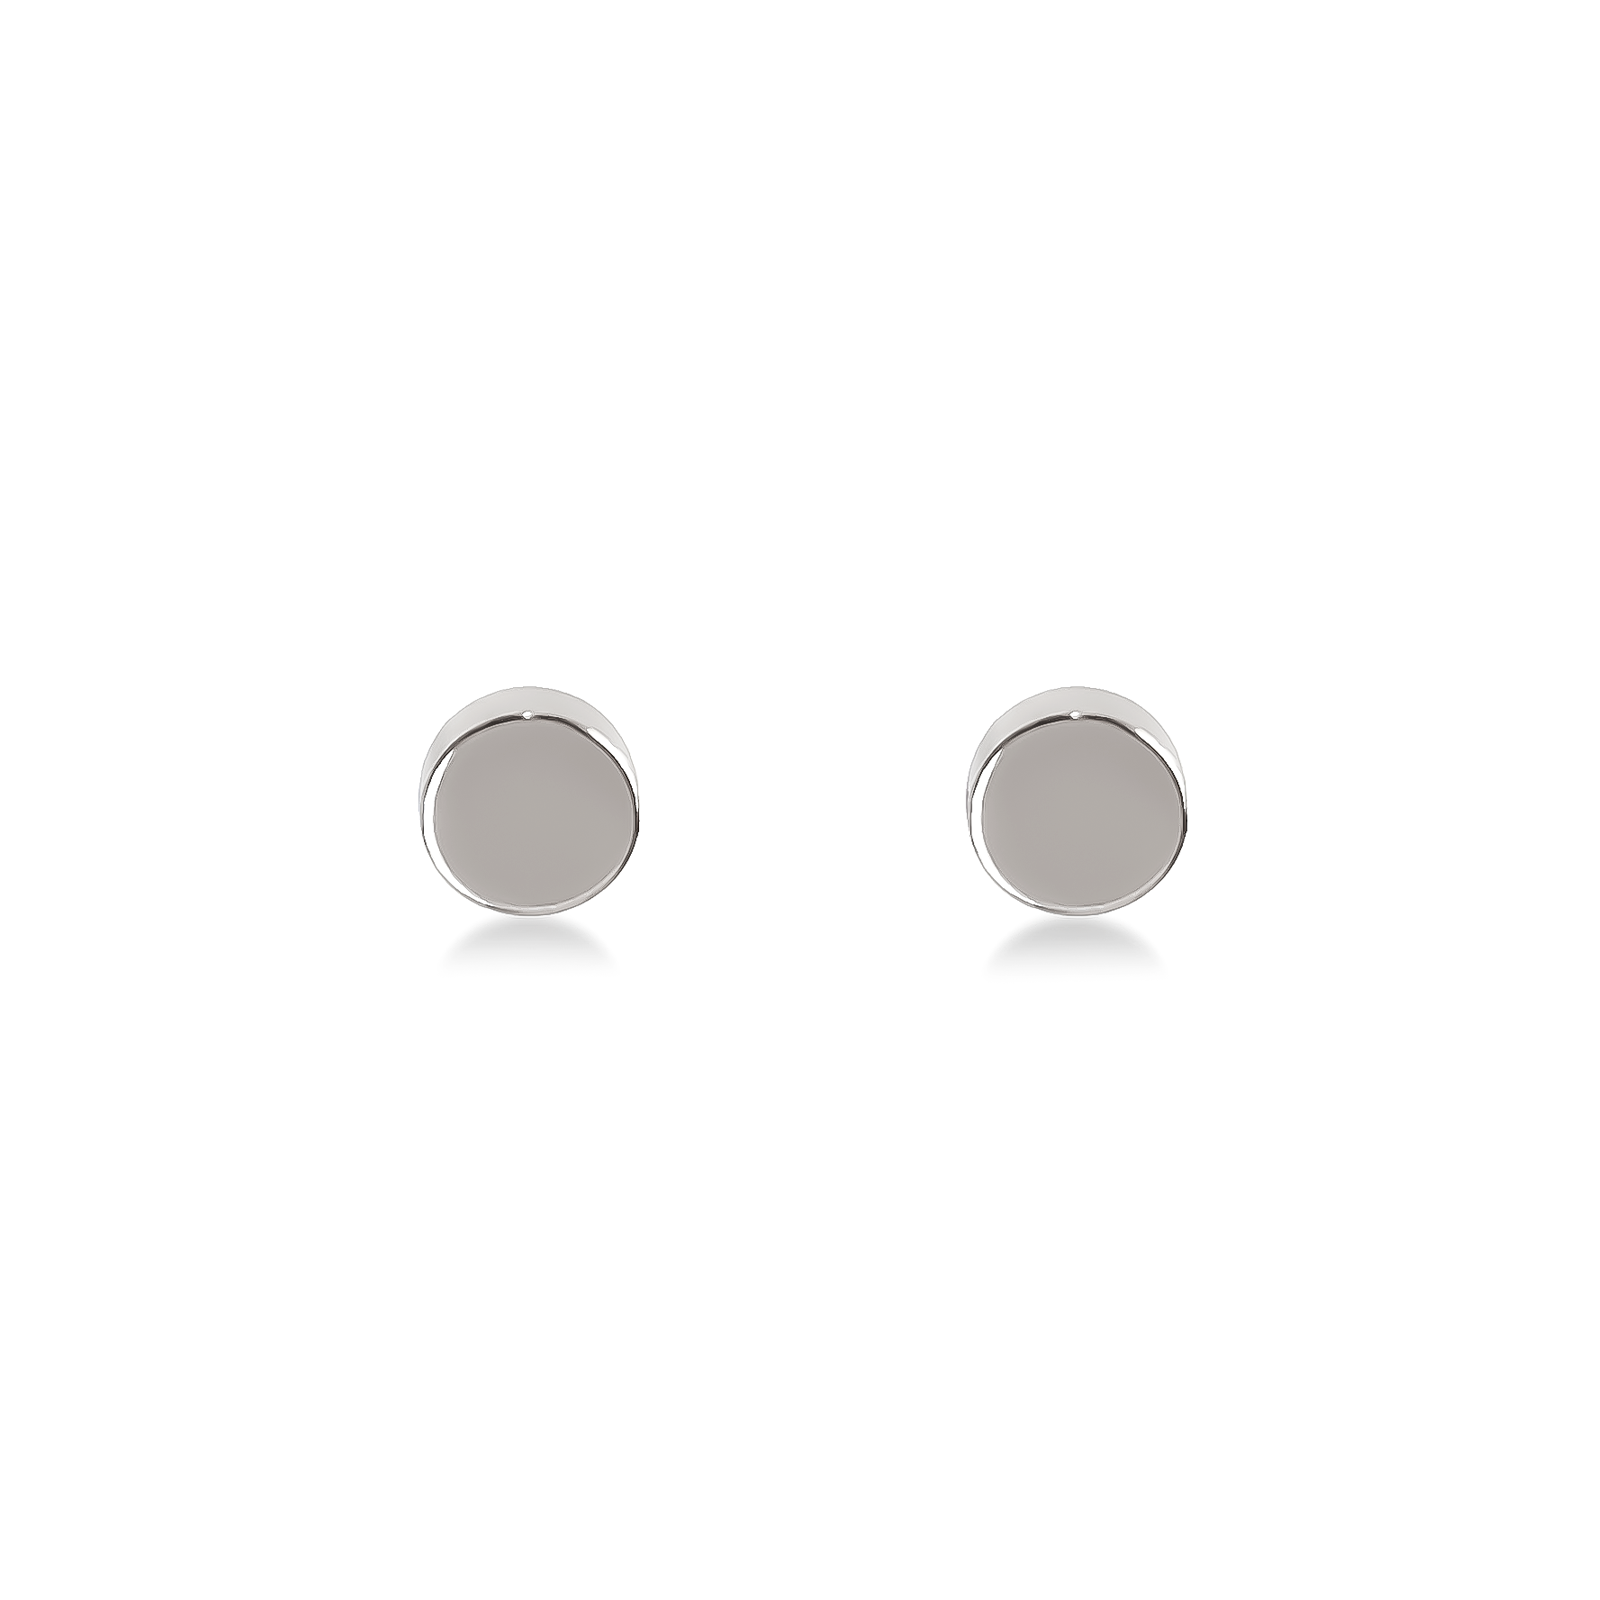 14K White Gold Ball Stud Earrings 3mm, 4mm, 5mm, 6mm or 8mm Round,  Minimalist Jewelry, Small Plain Studs, Second Piercings, Gift for Her - Etsy